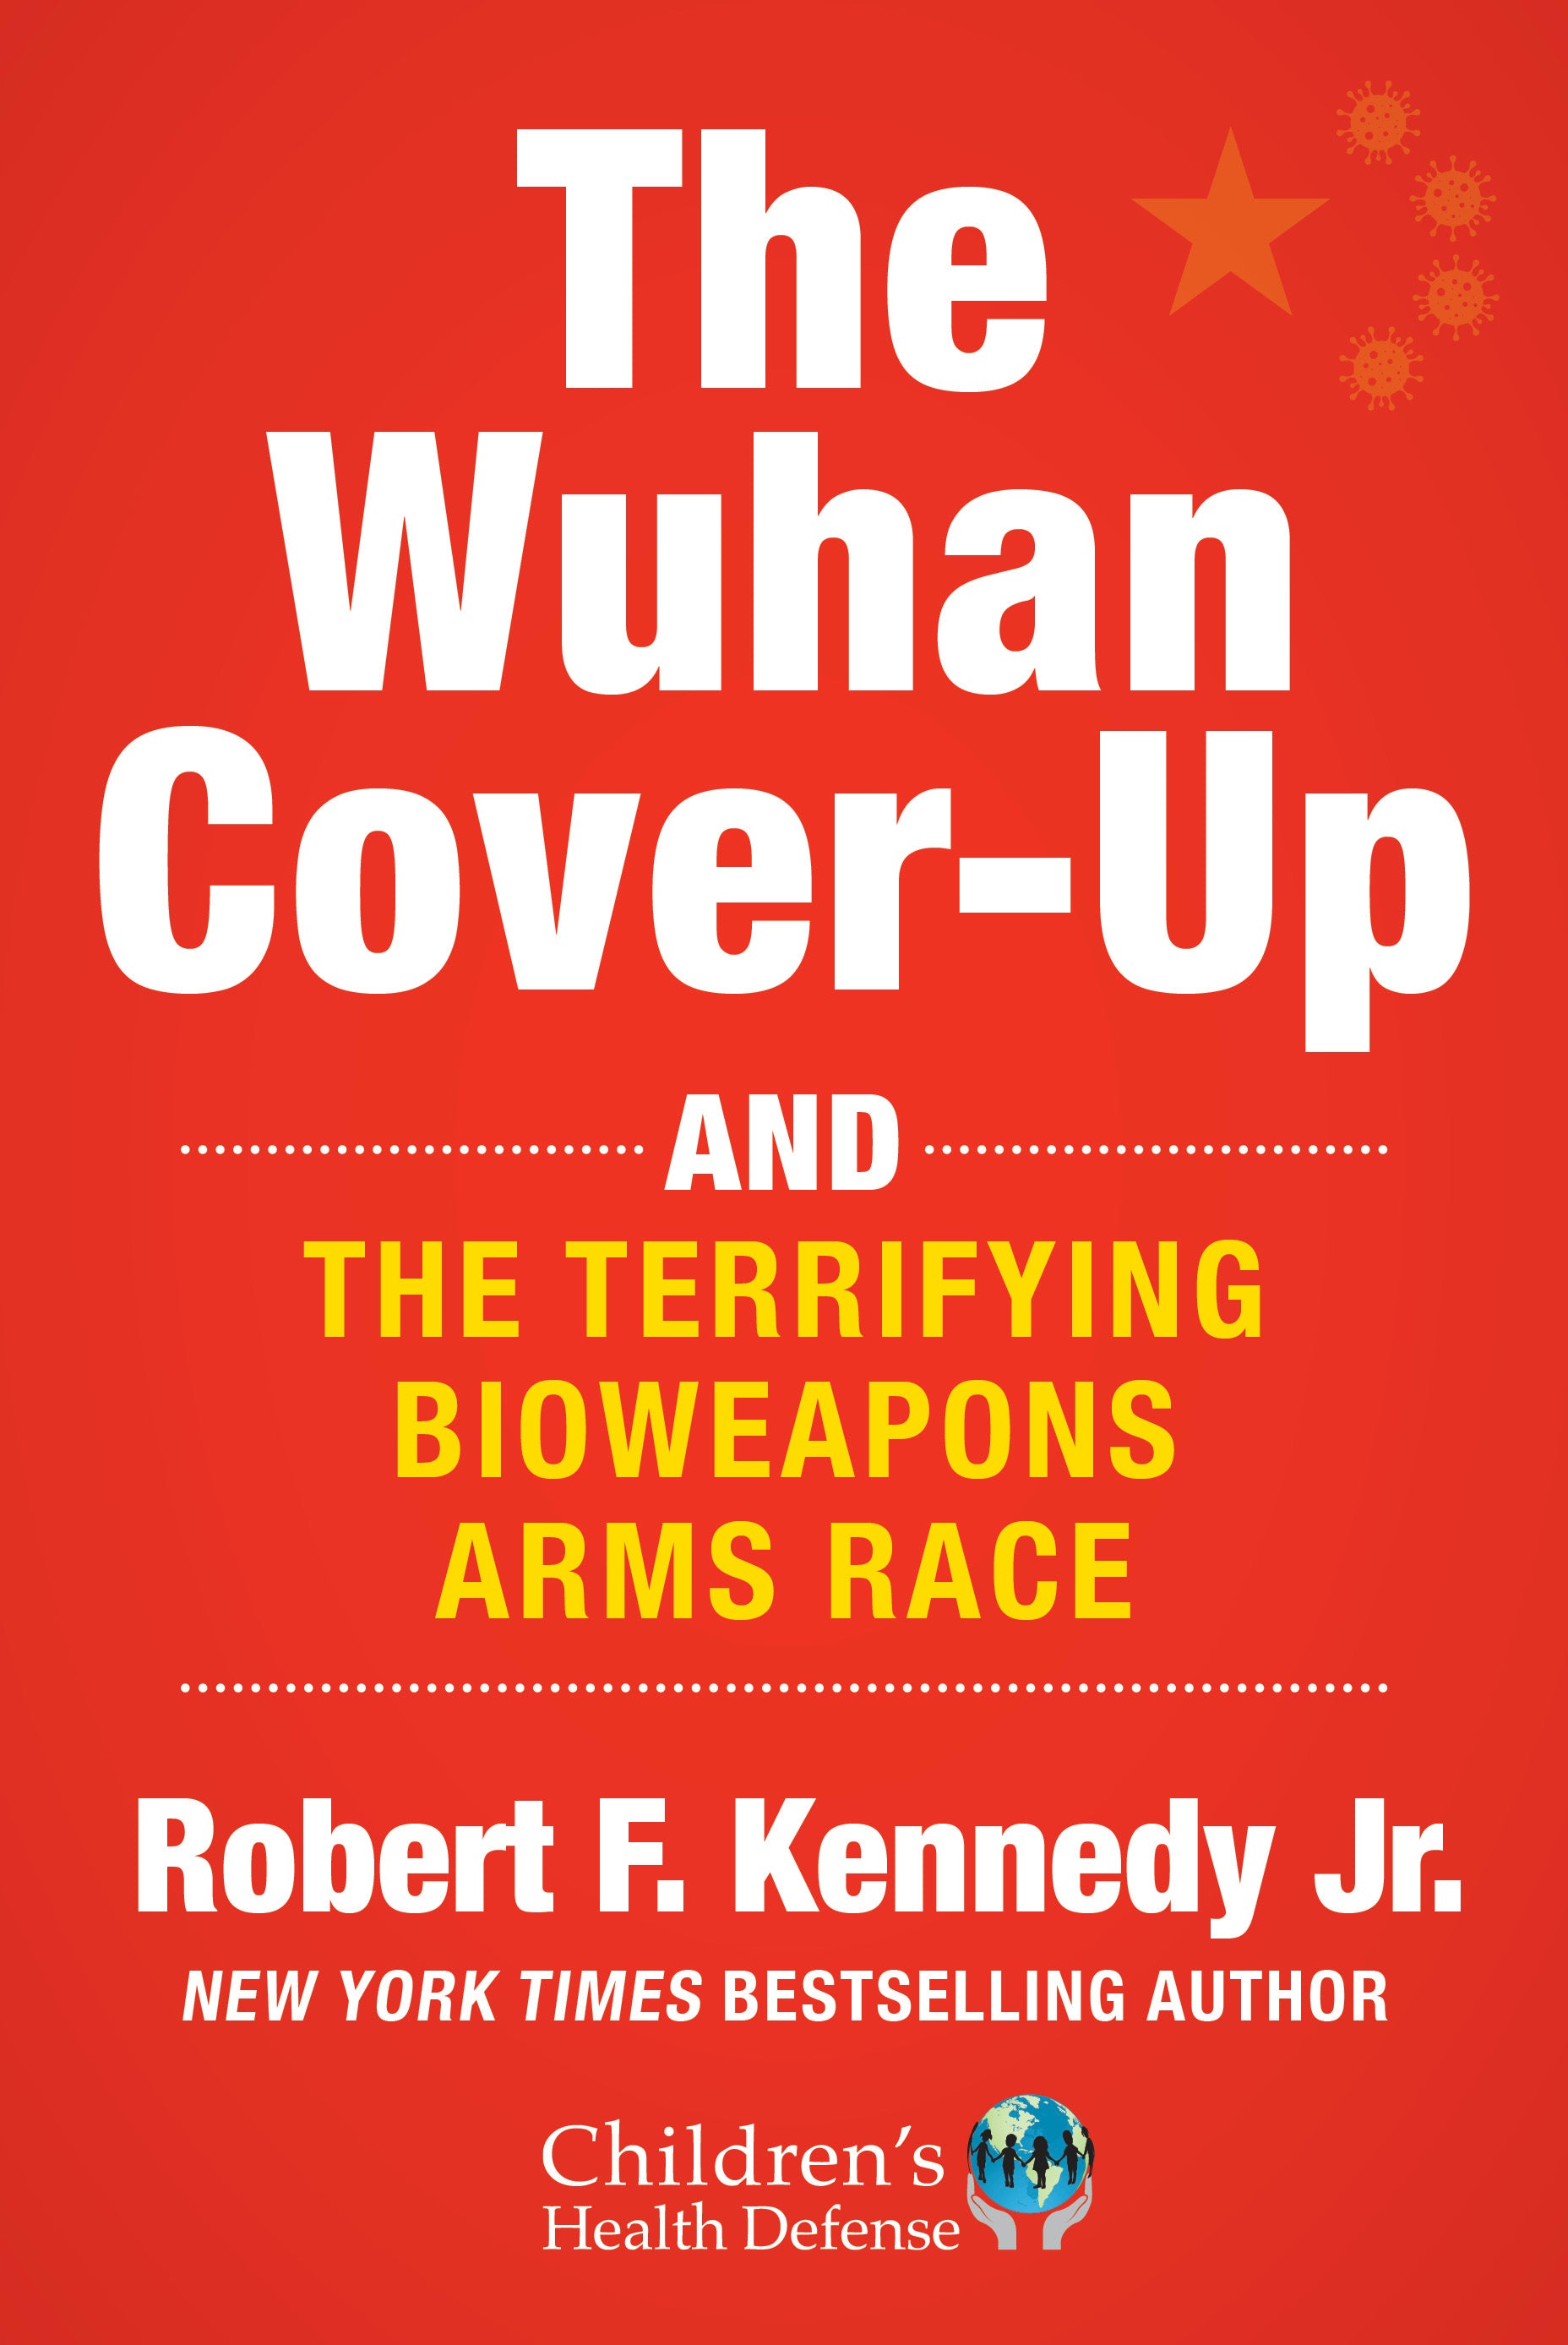 The Wuhan Cover-Up: And the Terrifying Bioweapons Arms Race (Hardcover)